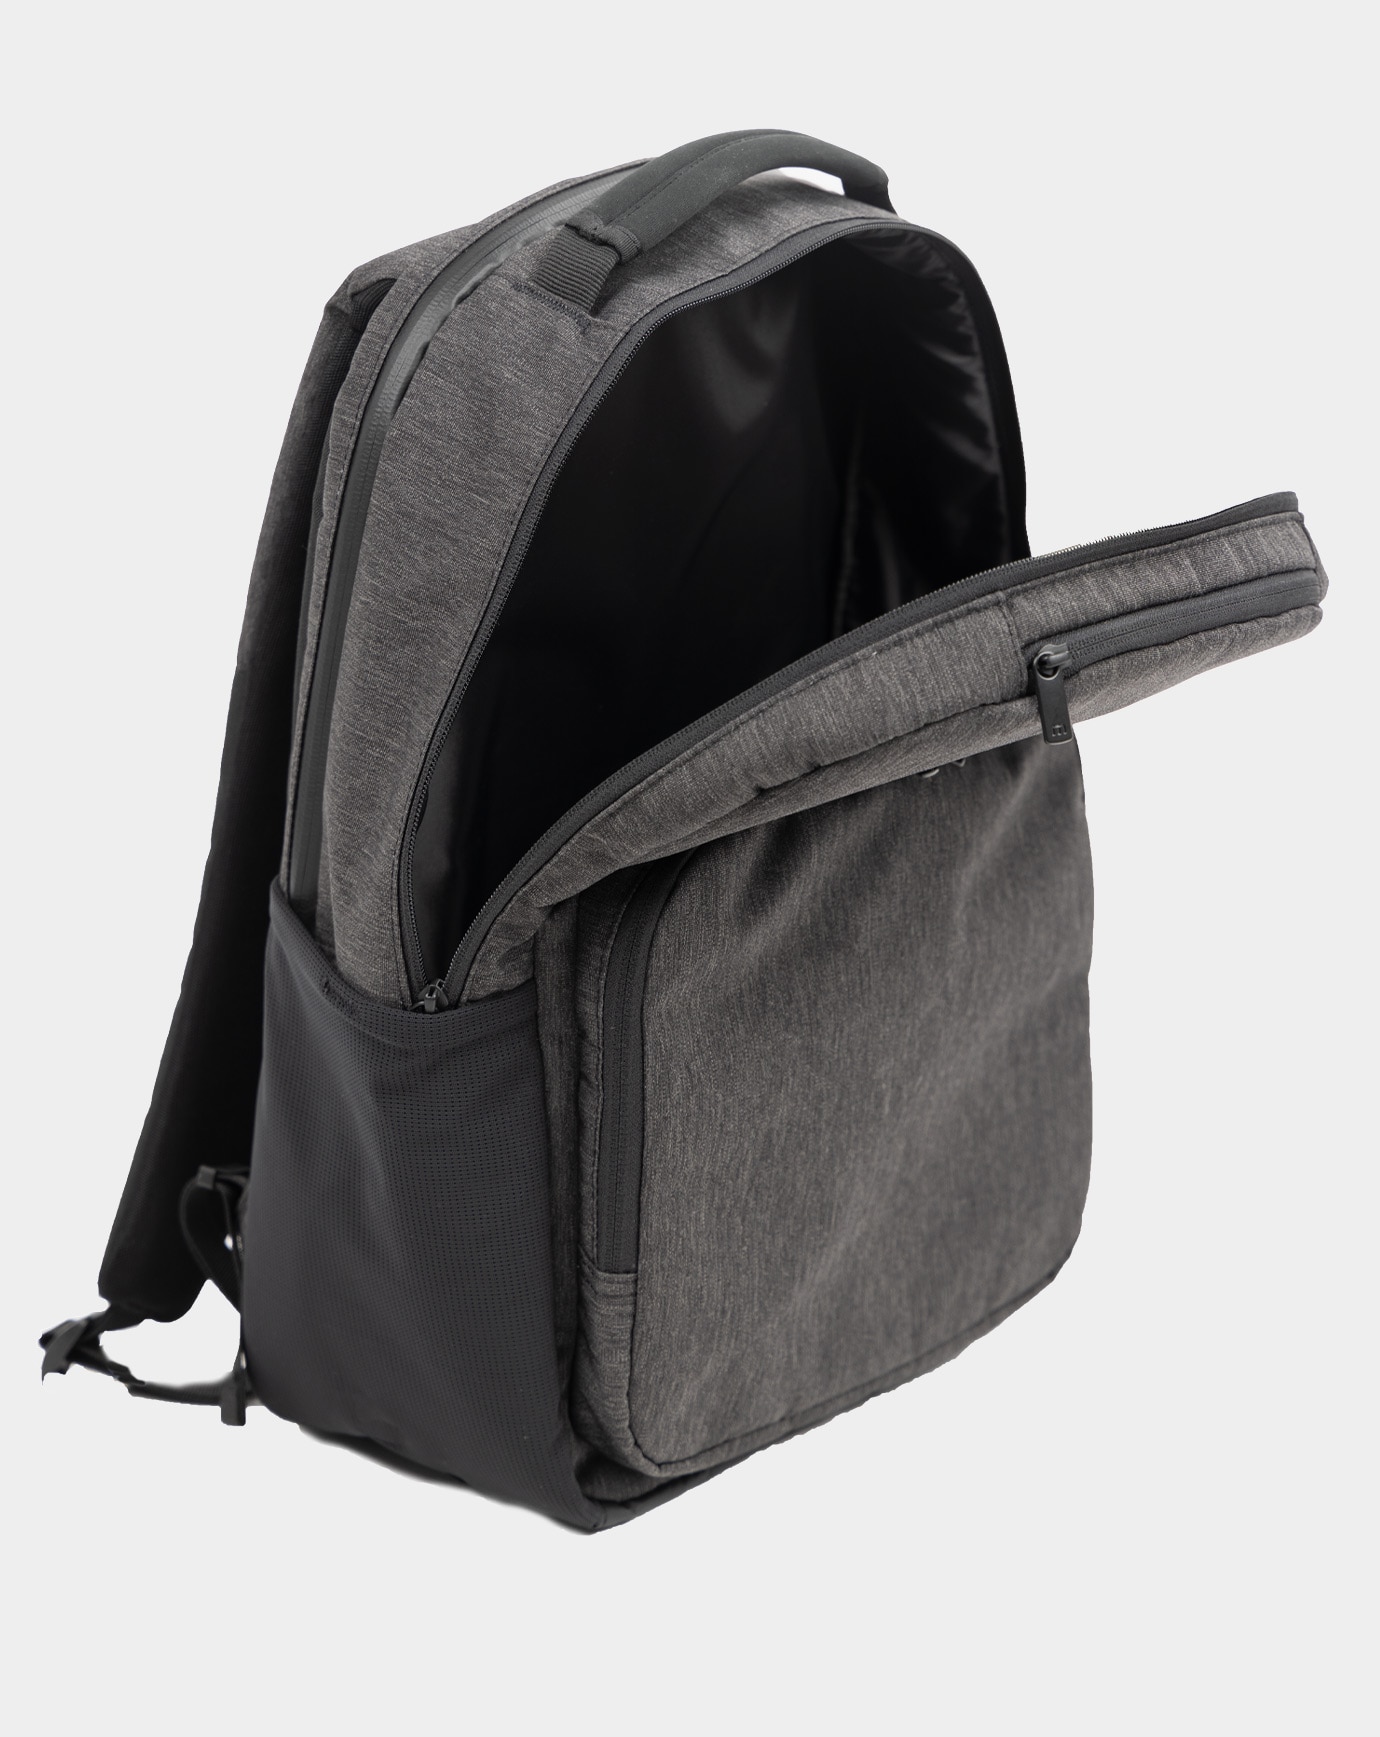 STEADYPACK BACKPACK Image Thumbnail 4